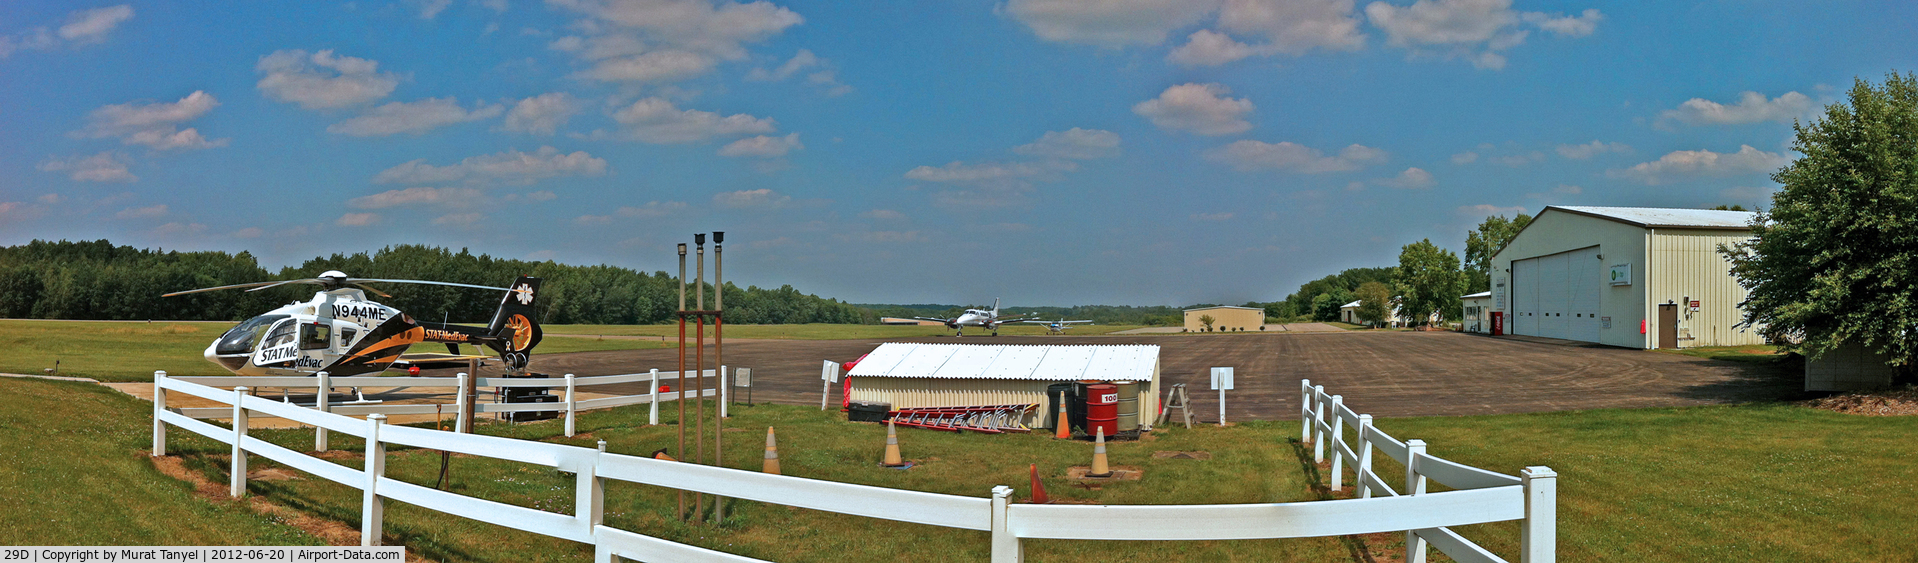 Grove City Airport (29D) - A panoramic view